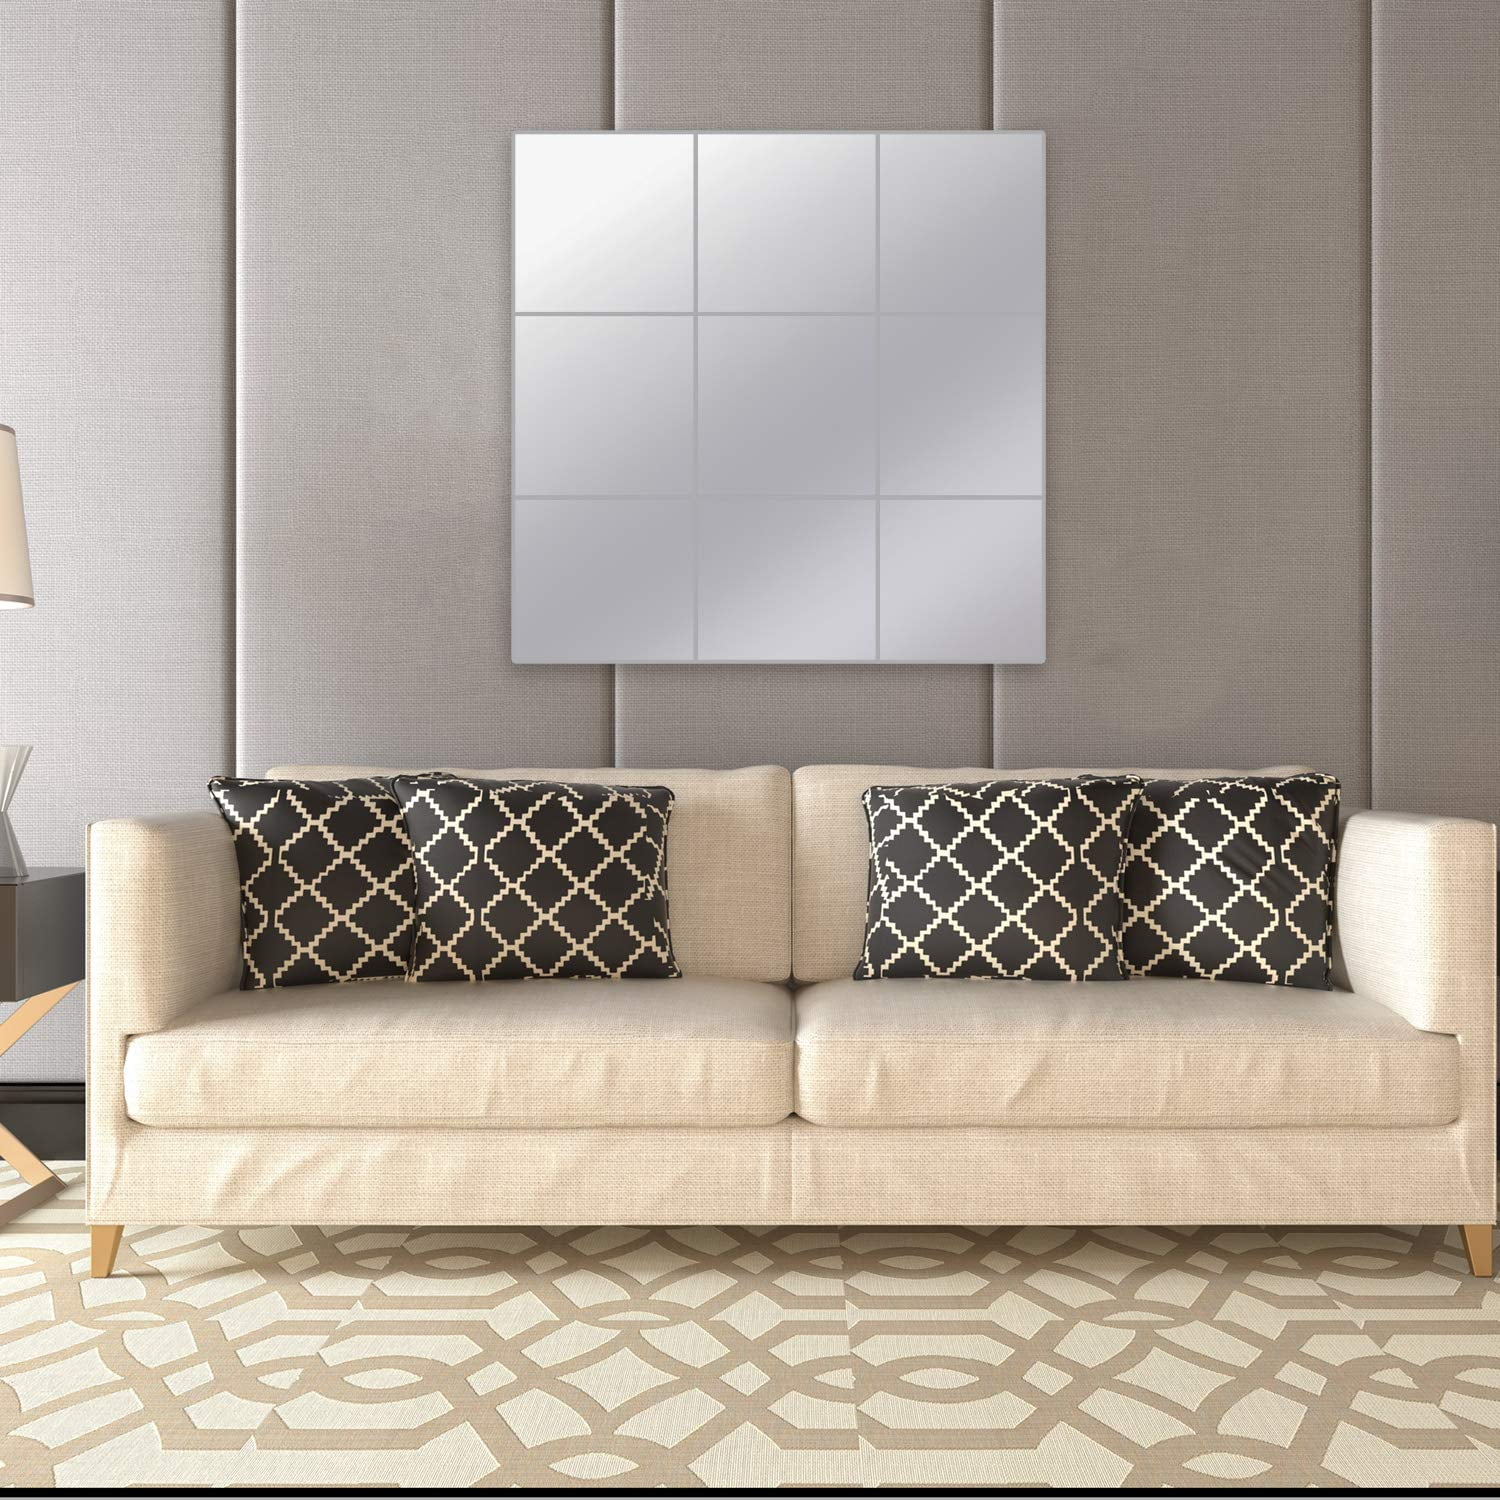 6/32PCS Square Mirror Tile Wall Stickers 3D Decal Mosaic Home Living Room Decor! 